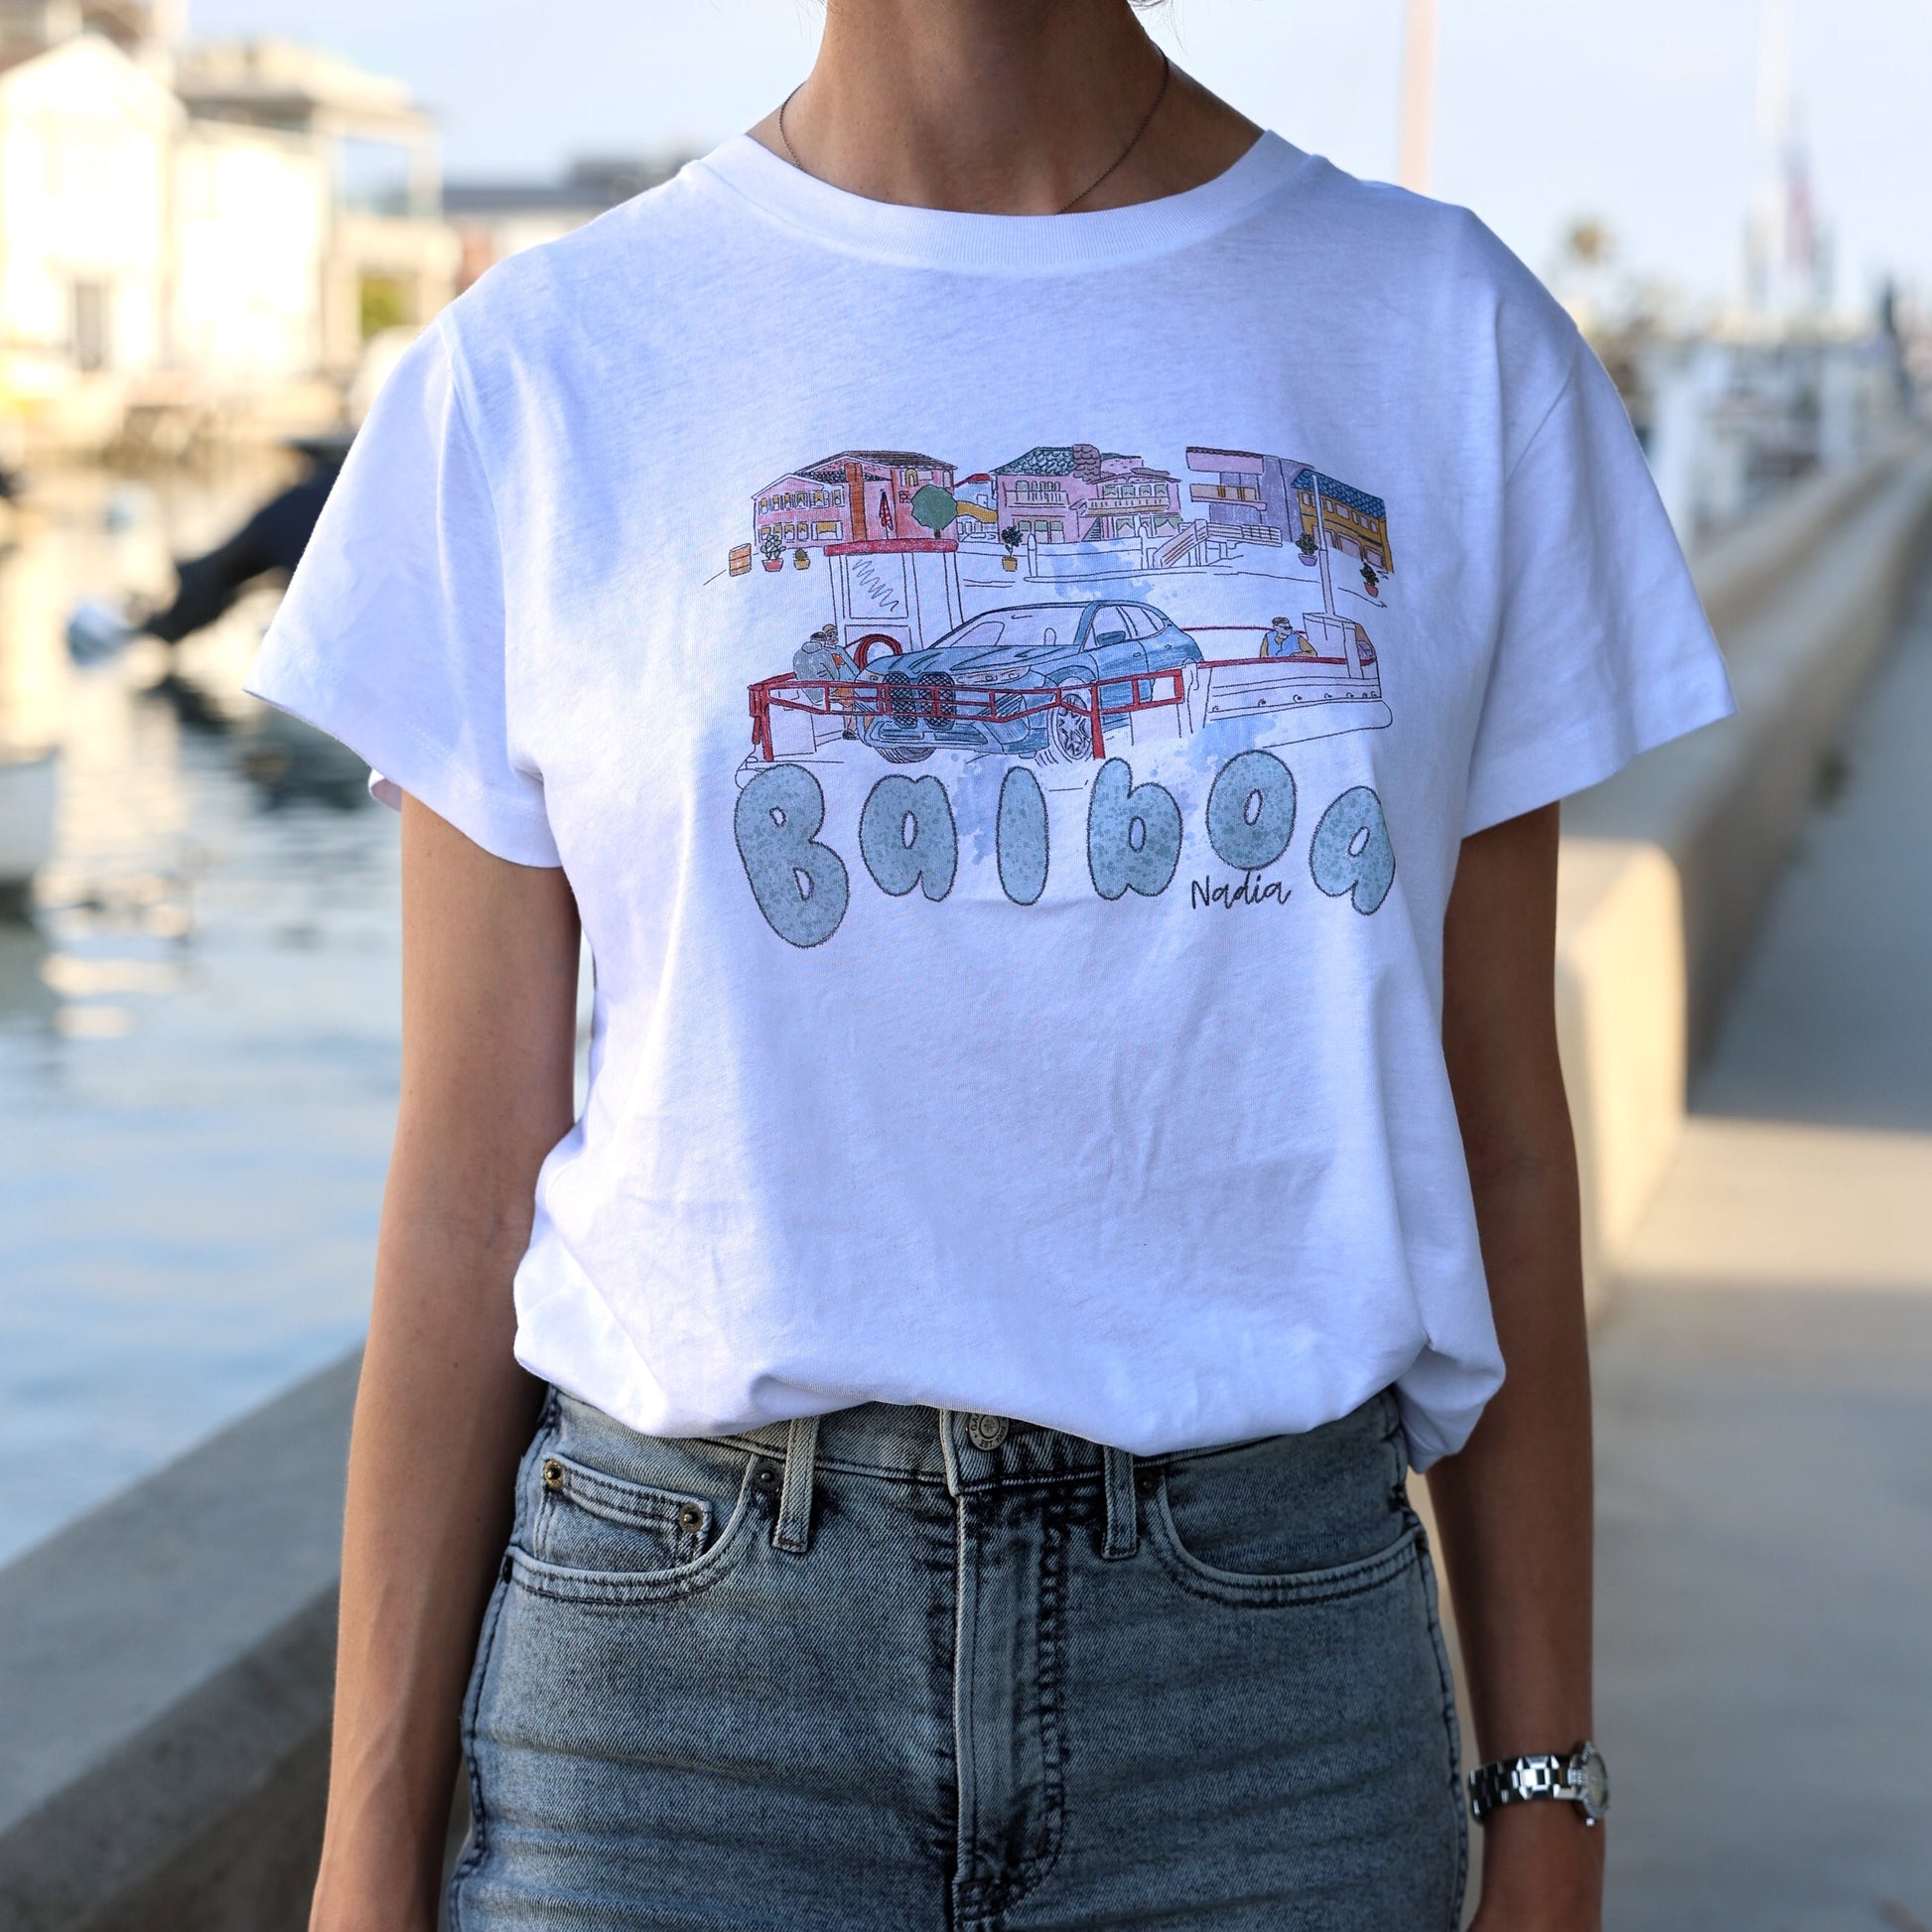 Balboa Island Ferry illustrated graphic tee for women carefully                              crafted by a local artist Nadia Watts. 